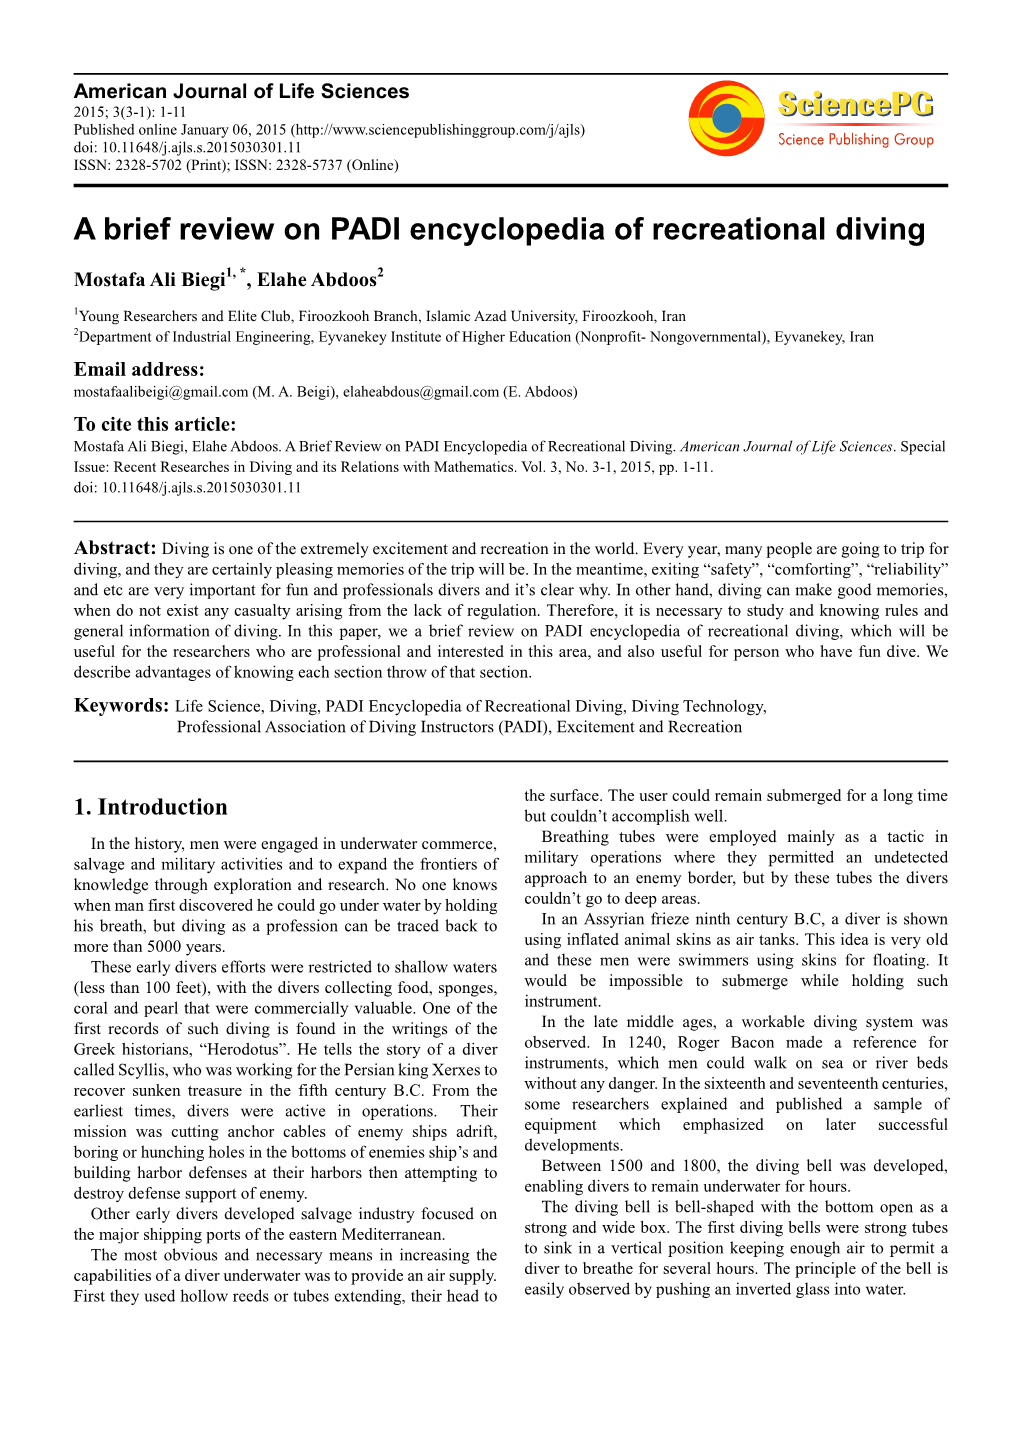 A Brief Review on PADI Encyclopedia of Recreational Diving